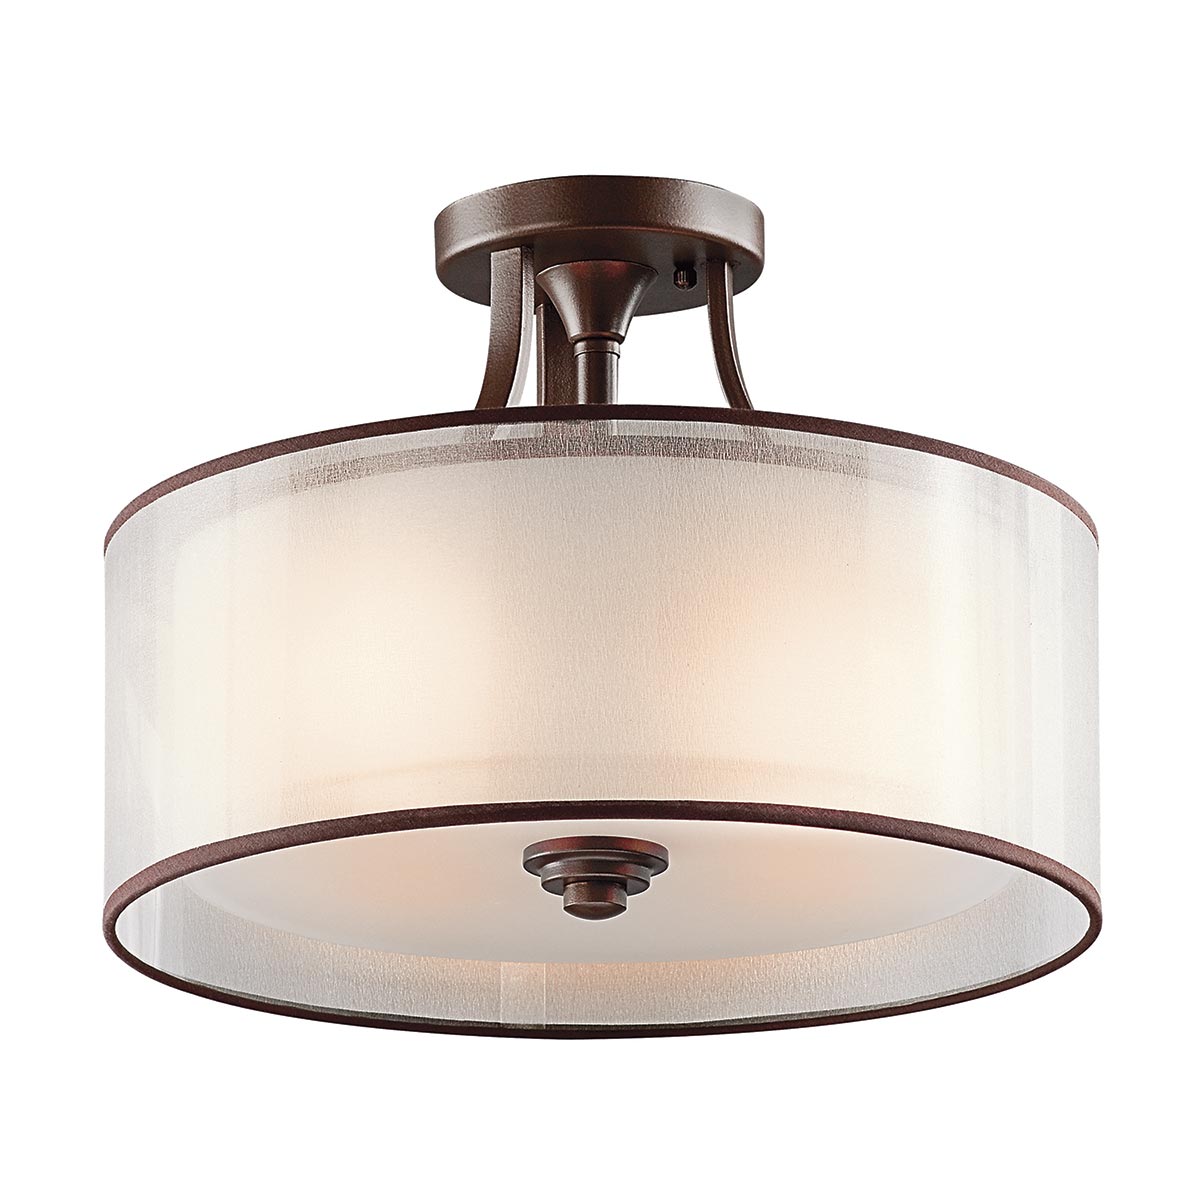 Kichler Lacey Small 3 Lamp Semi Flush Low Ceiling Light Mission Bronze